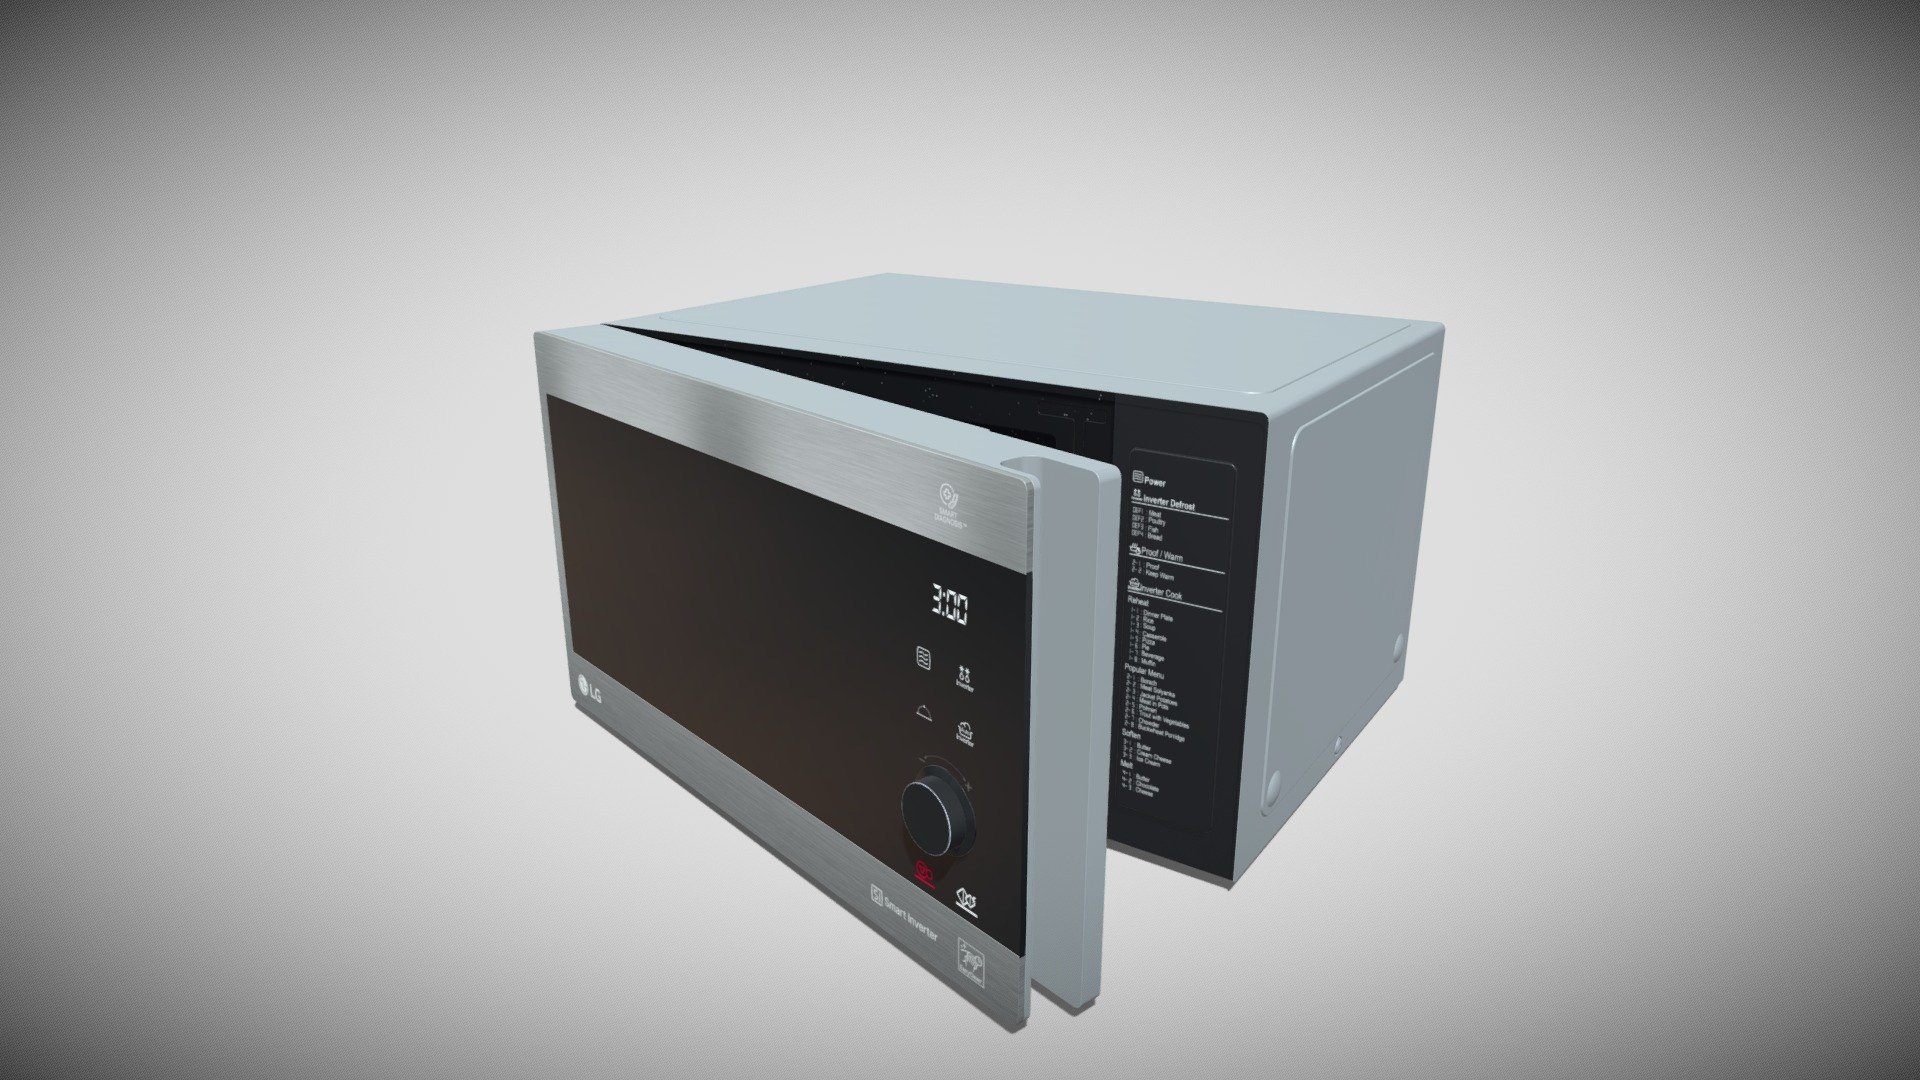 Detailed model of an LG Neochef Microwave Oven And Grill, modeled in Cinema 4D.The model was created using approximate real world dimensions.

The model has 39,543 polys and 38,419 vertices.

An additional file has been provided containing the original Cinema 4D project file, textures and other 3d export files such as 3ds, fbx and obj 3d model